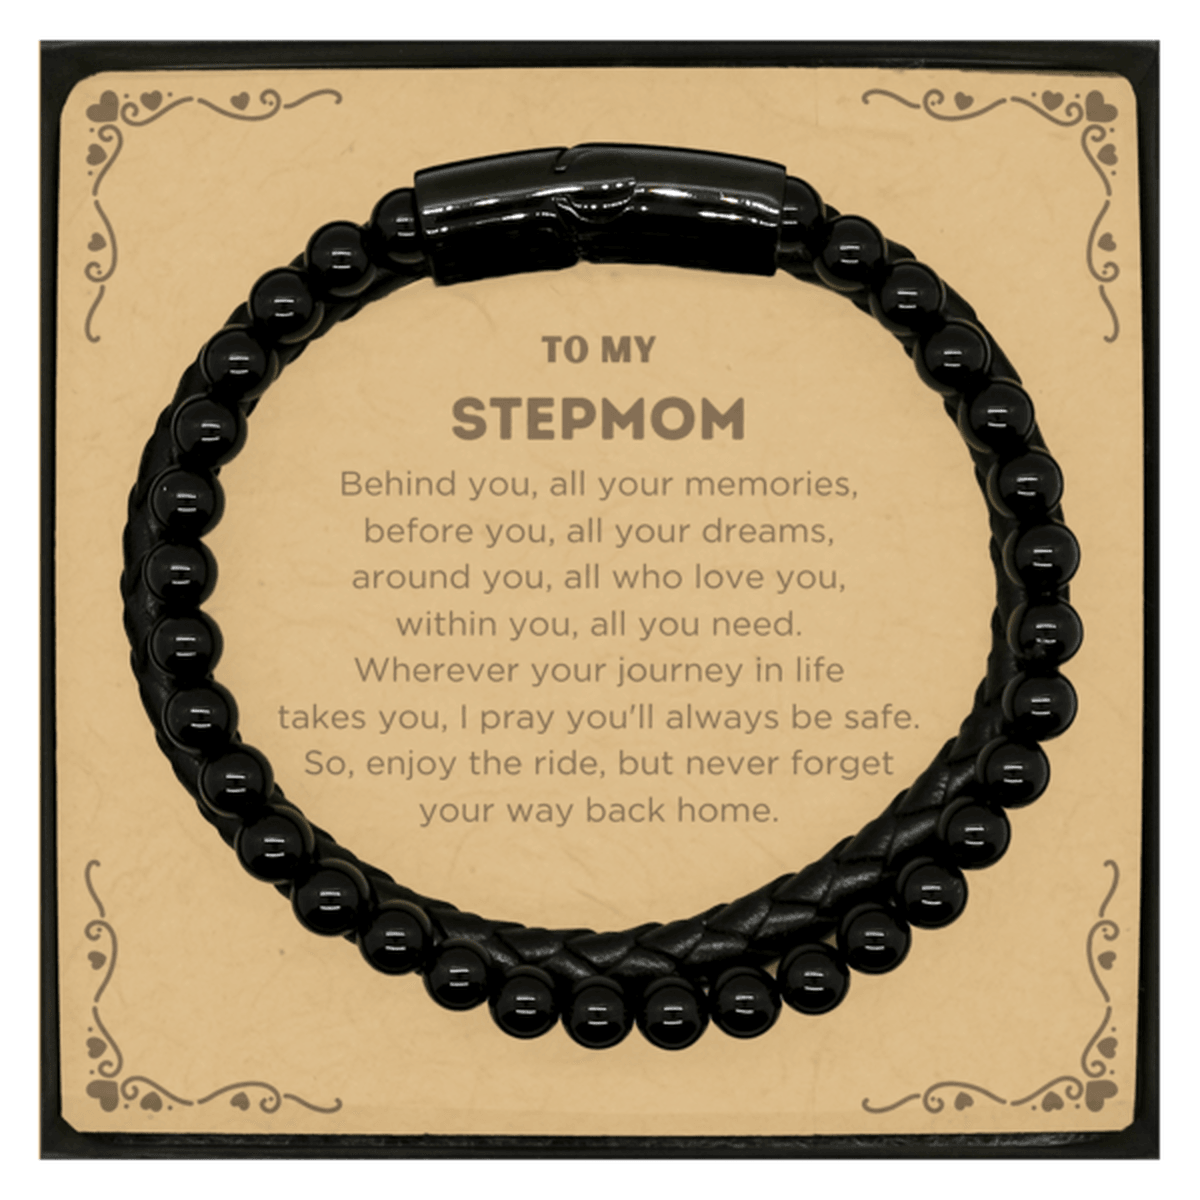 To My Stepmom Gifts, Inspirational Stepmom Stone Leather Bracelets, Sentimental Birthday Christmas Unique Gifts For Stepmom Behind you, all your memories, before you, all your dreams, around you, all who love you, within you, all you need - Mallard Moon Gift Shop